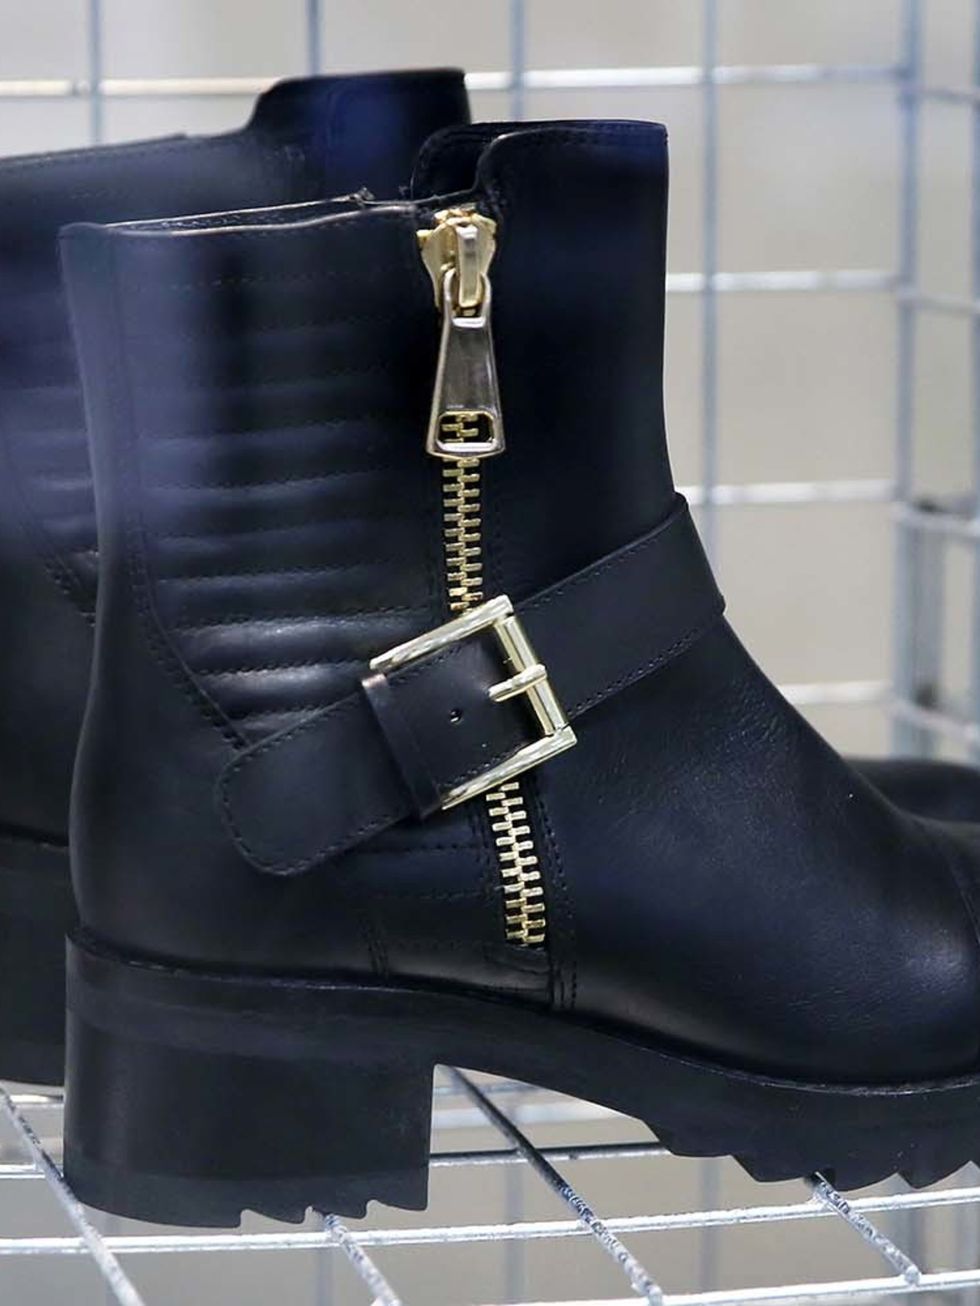 <p>Find out more <a href="http://www.dunelondon.com/poloma-shark-sole-quilted-leather-biker-boot-0092508770002484/?utm_source=Elle-Magazine&utm_medium=Banner&utm_content=Poloma-Black&utm_campaign=Elle-360" style="line-height: 20.8px;">here</a></p>

<p> </